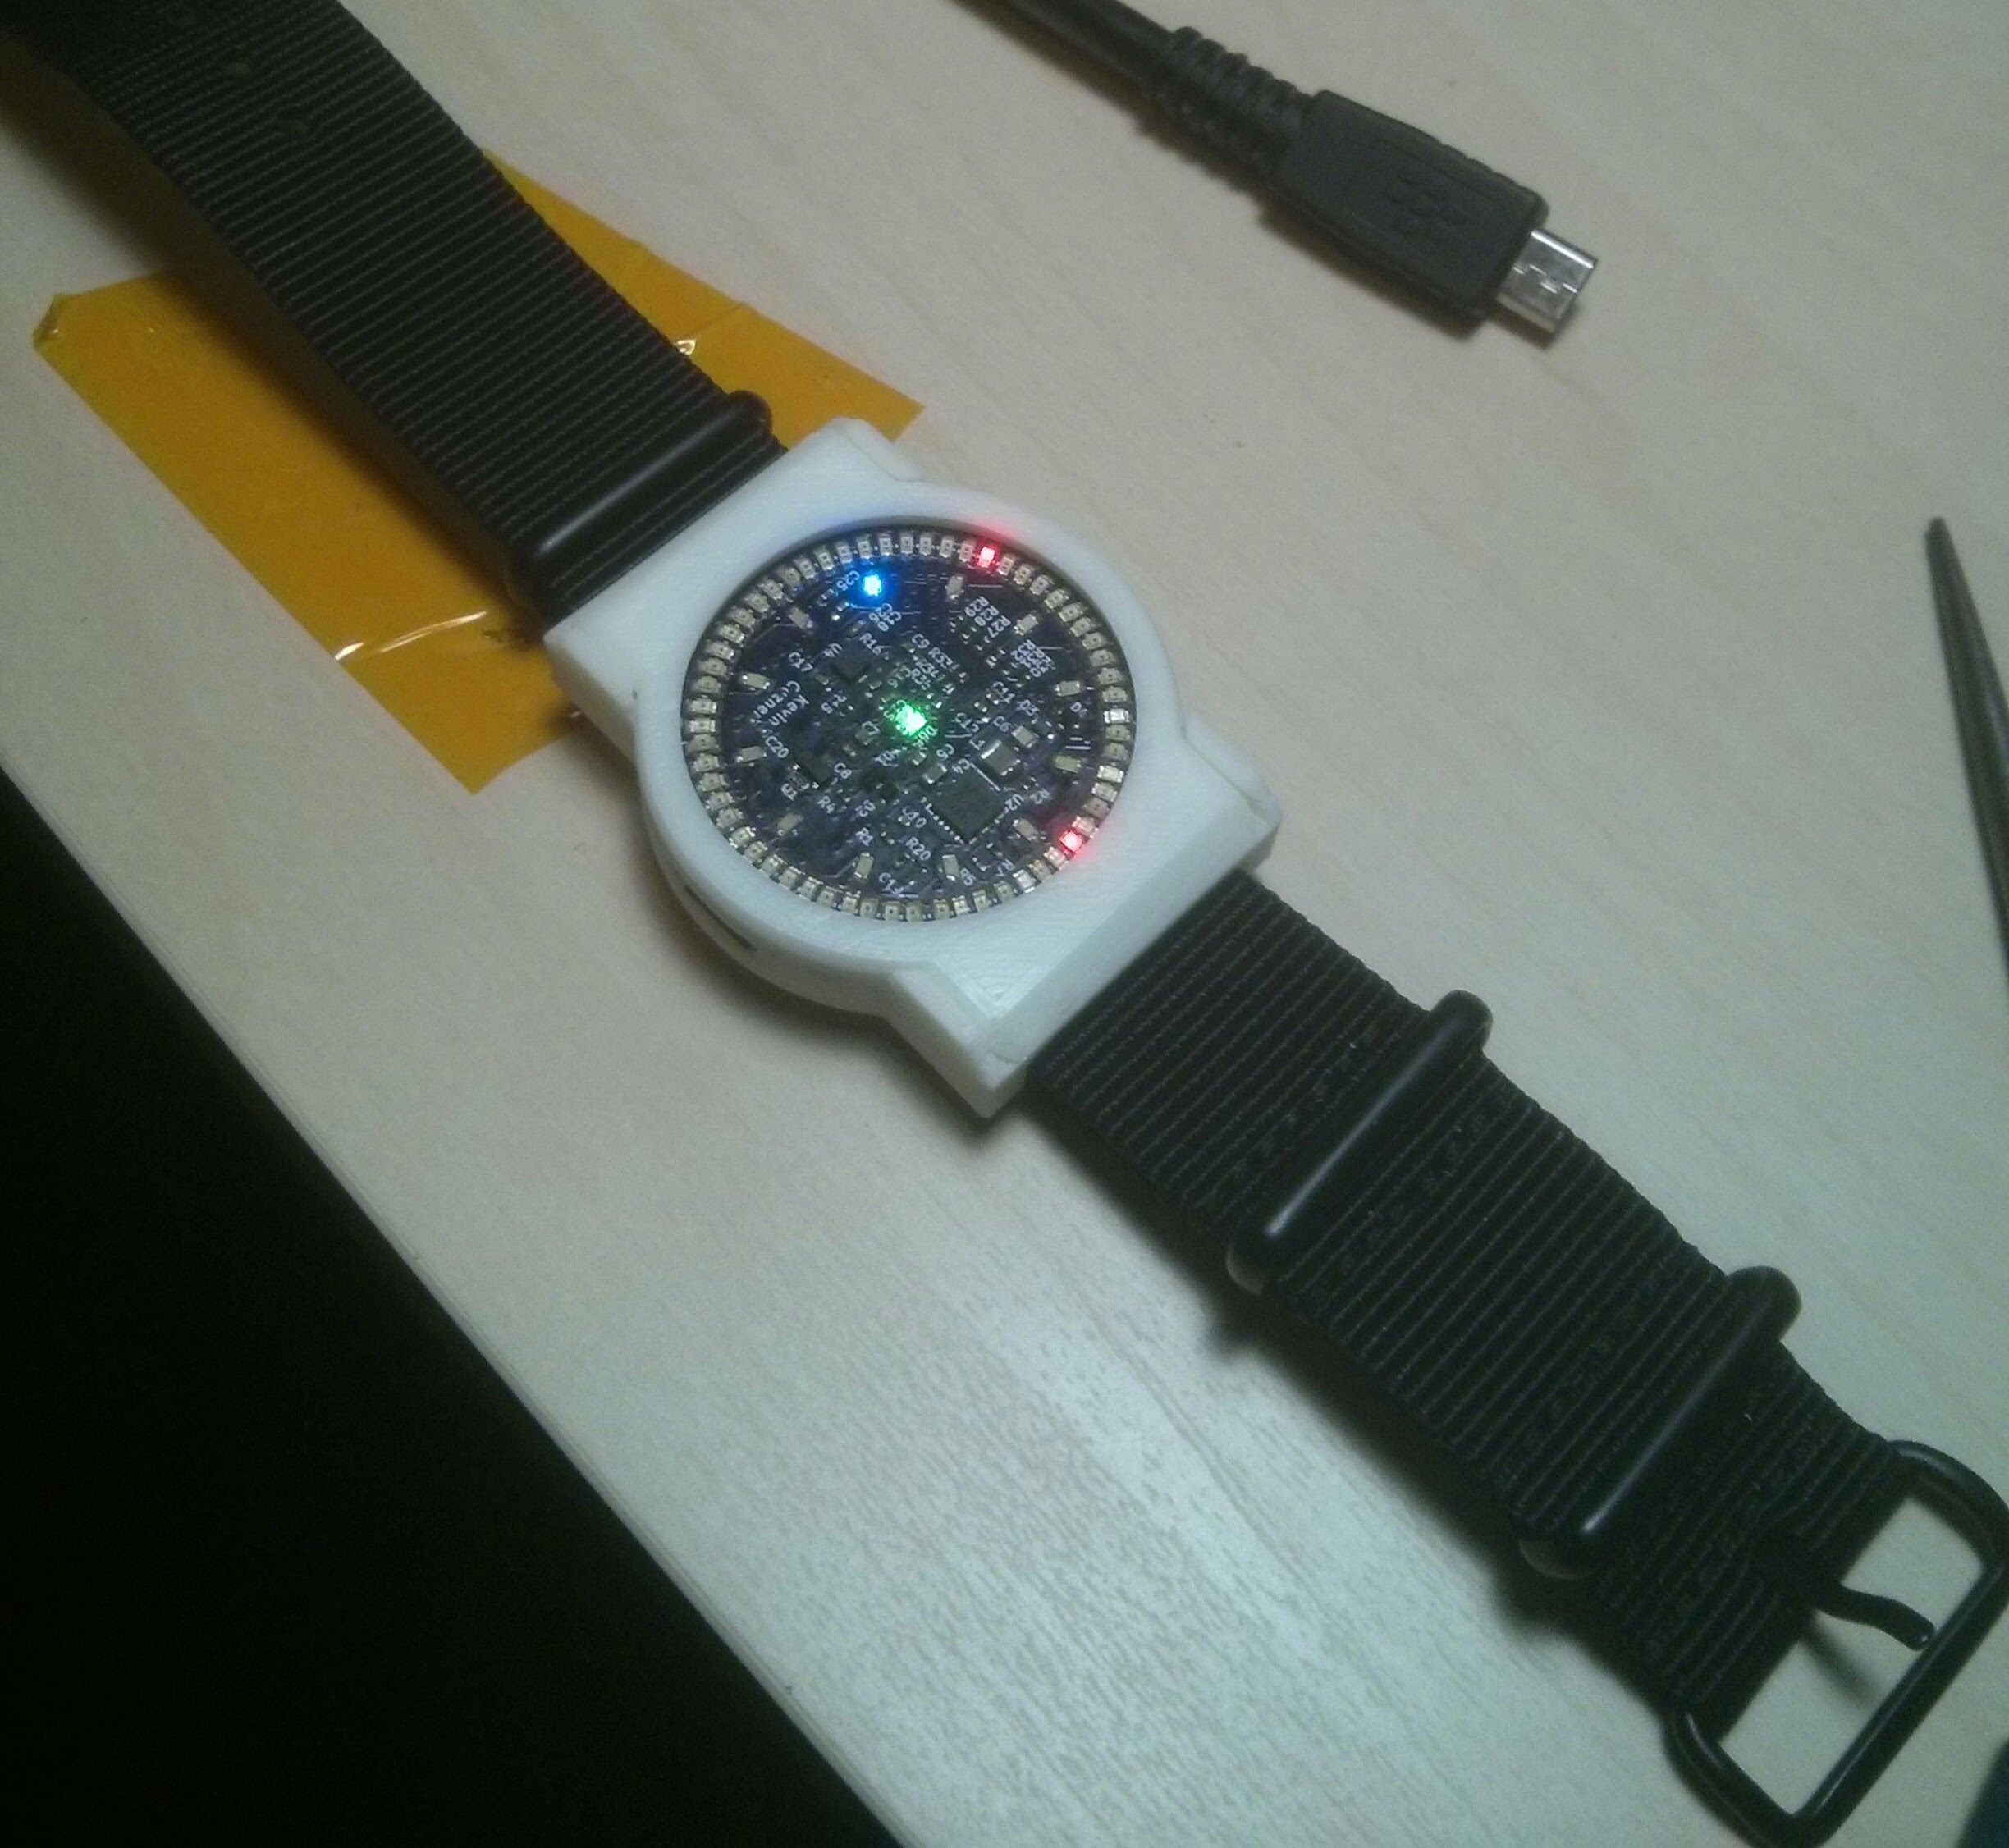 Actual watch